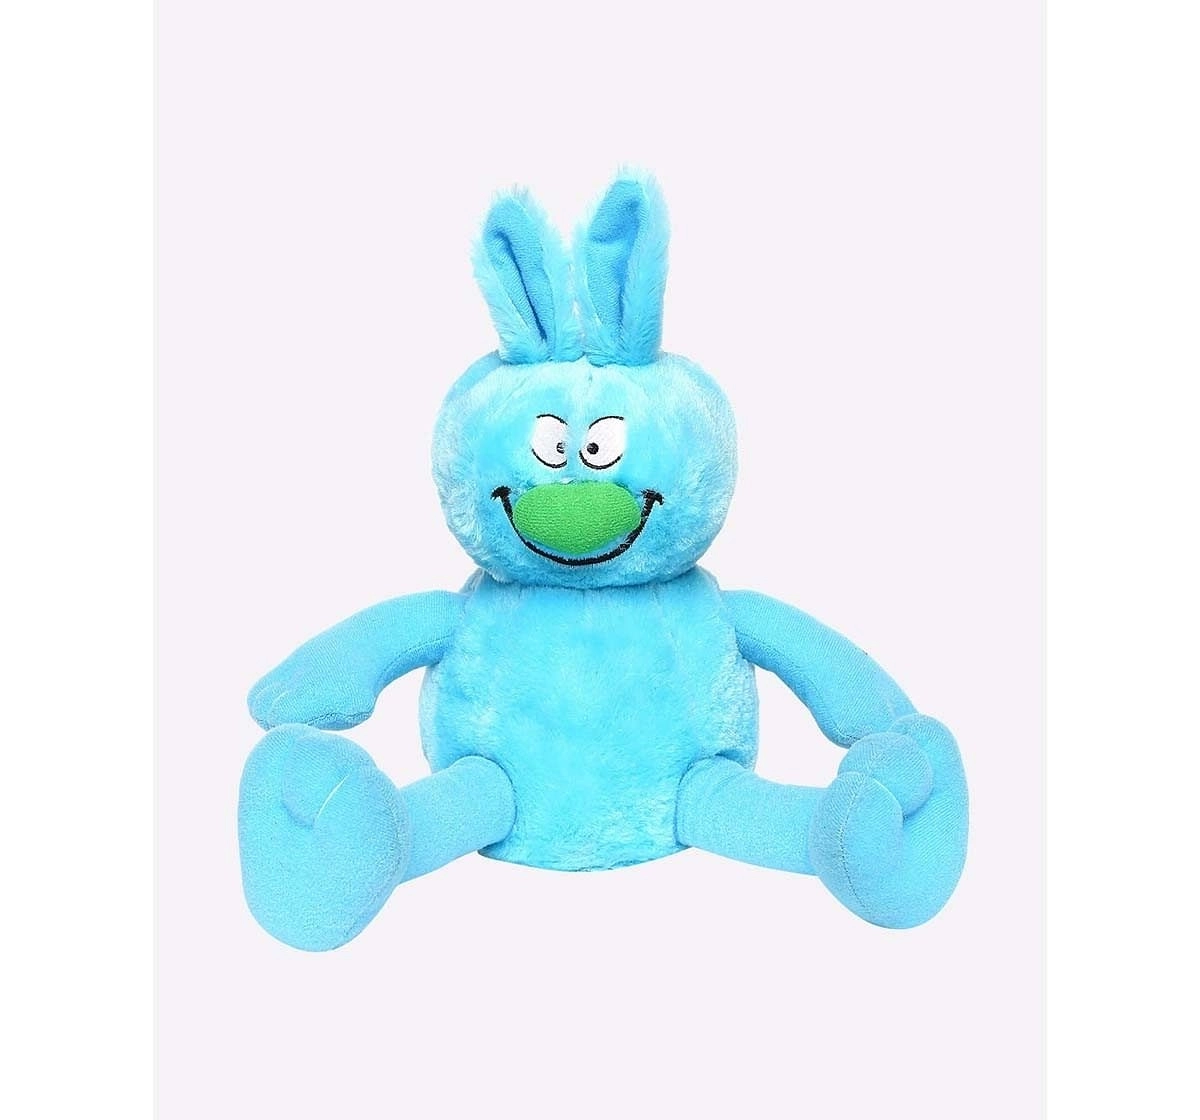 Hamleys Movers & Shakers Blue Ziggles Interactive Soft Toys for Kids Age 3Y+ - 26 Cm (Blue)